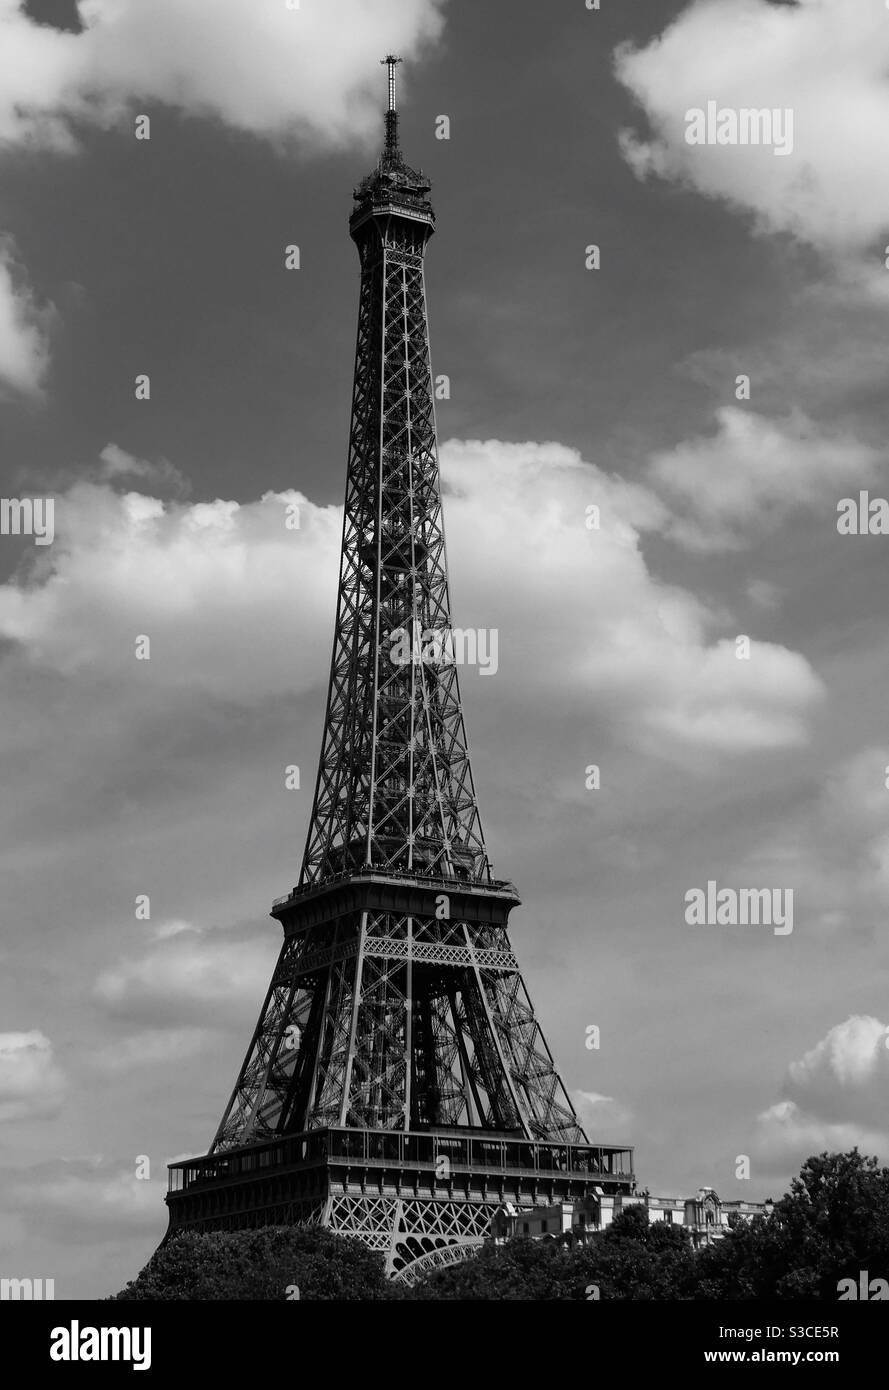 The Eiffel Tower in black and white Stock Photo